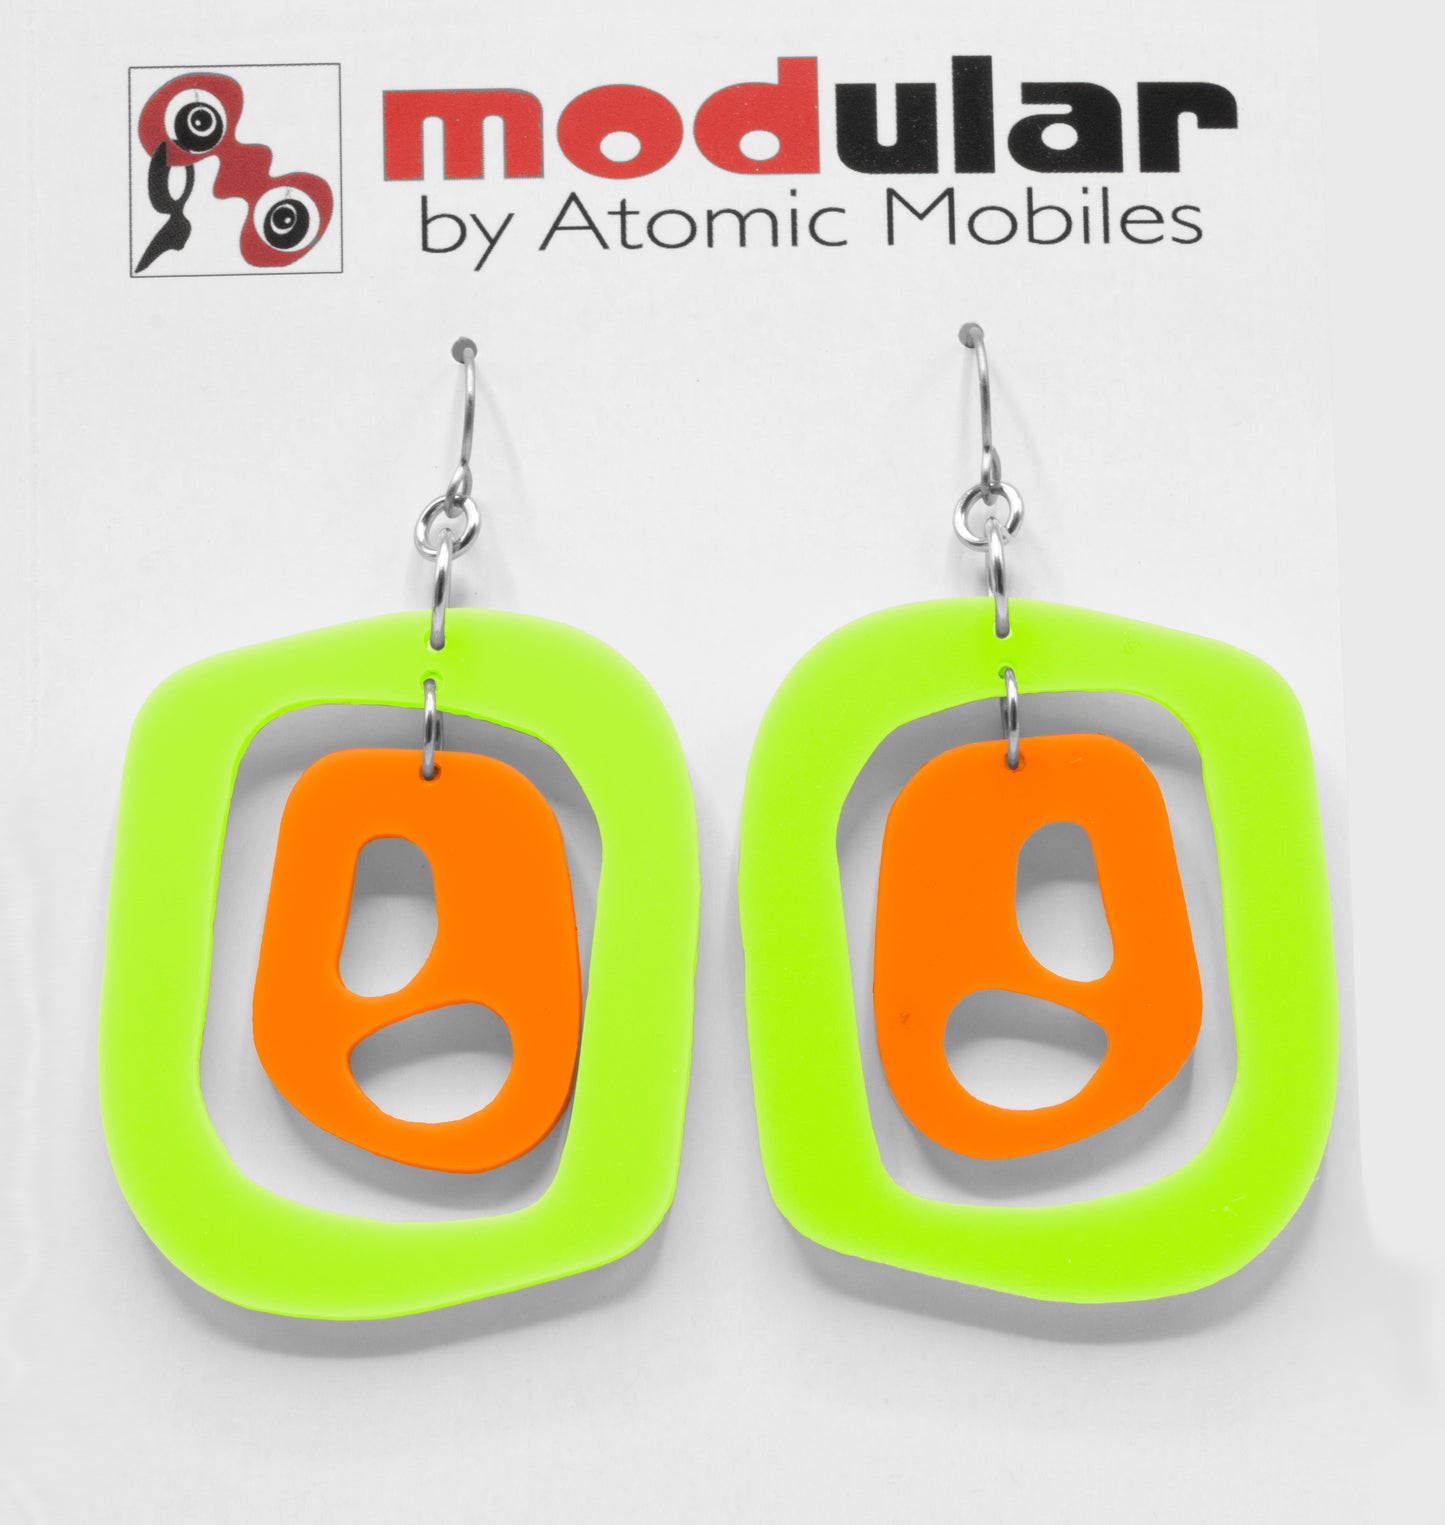 MODular Earrings - Mid 20th Statement Earrings in Lime and Orange by AtomicMobiles.com - retro era mod handmade jewelry